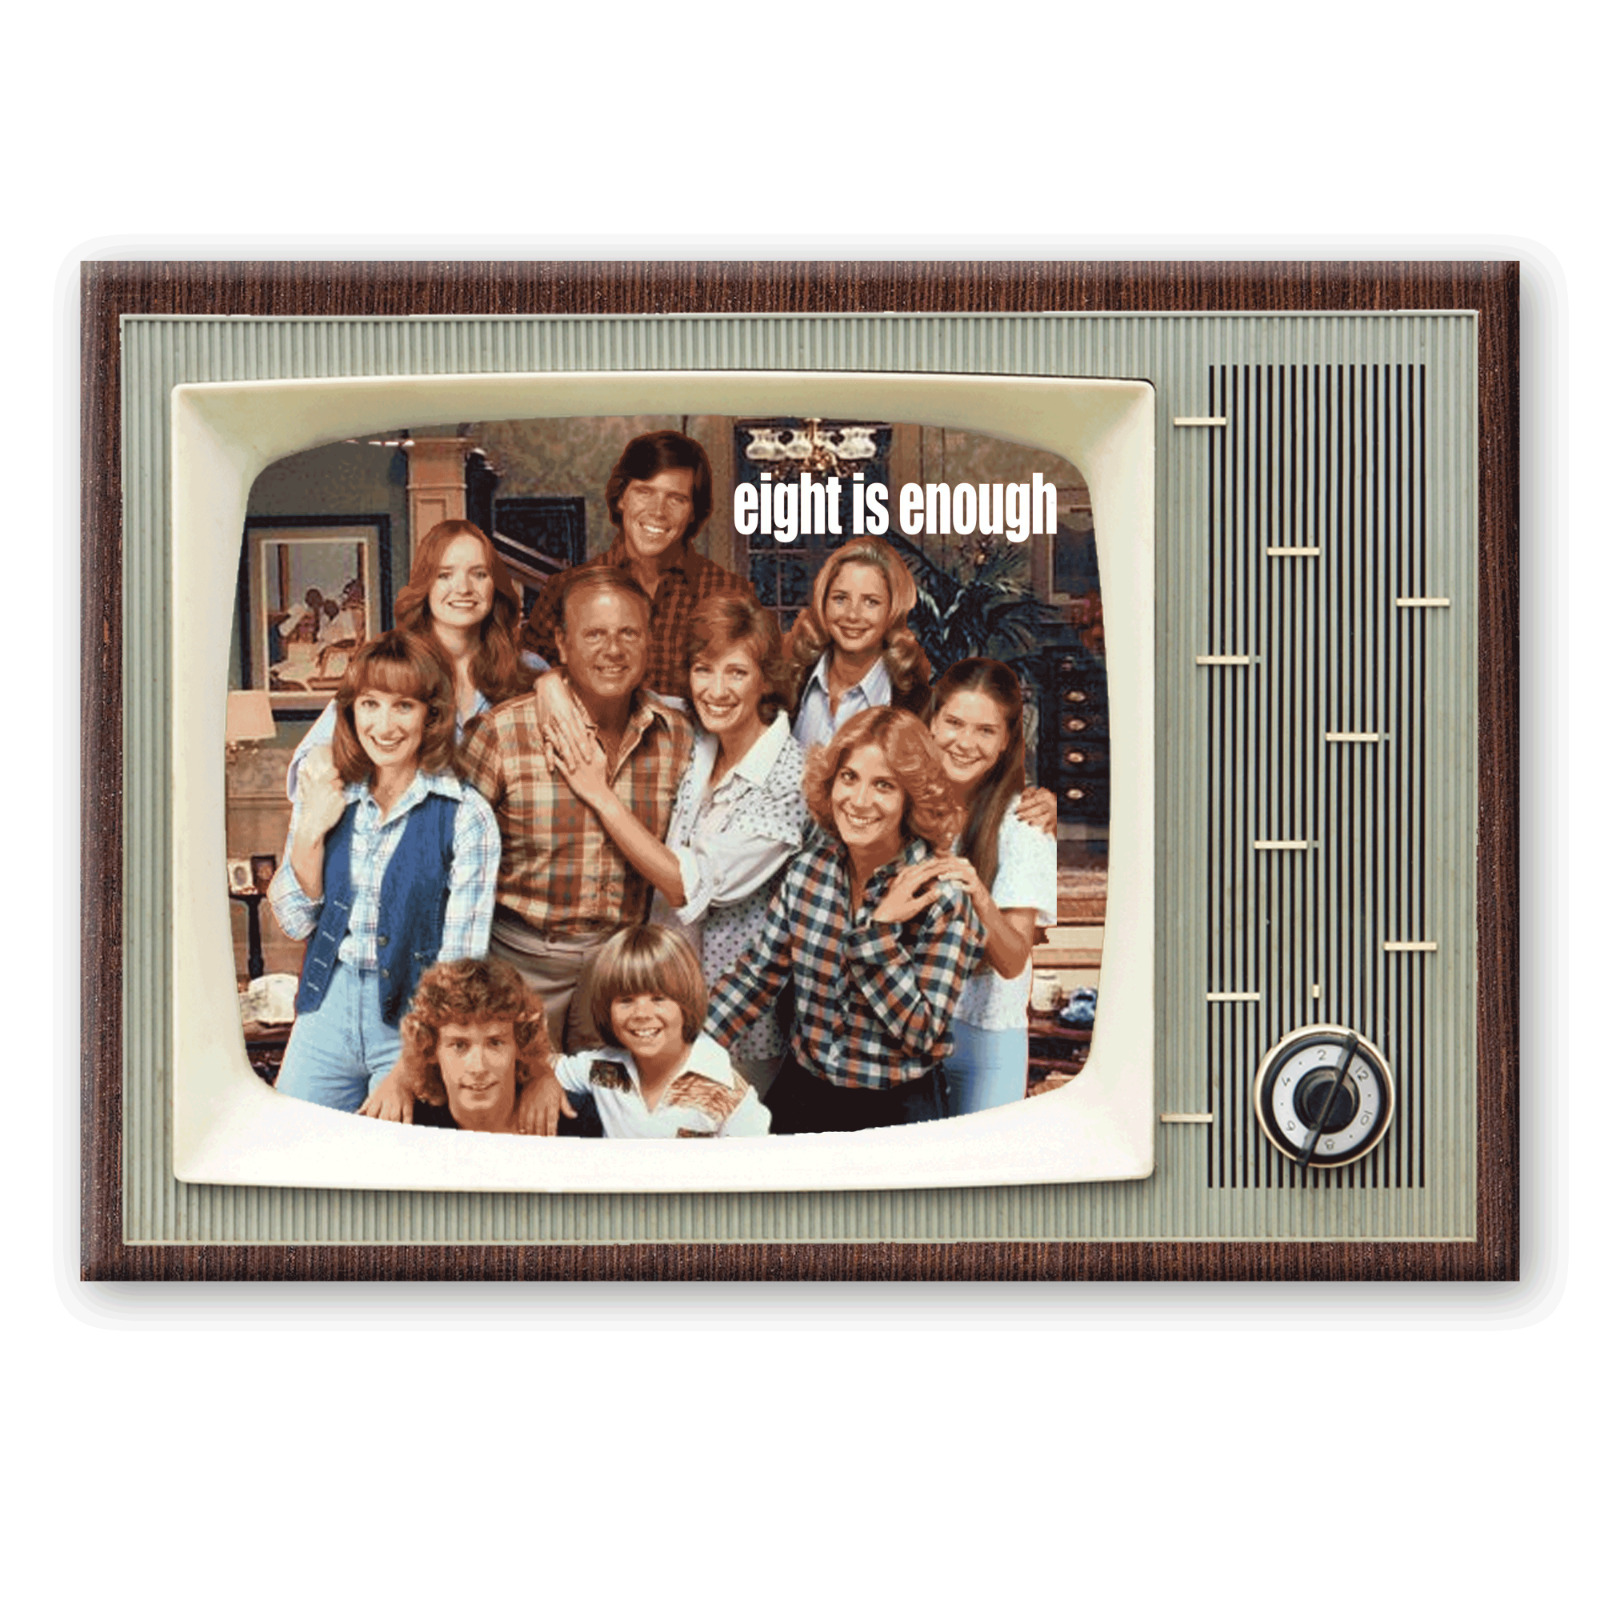 EIGHT IS ENOUGH TV Show Retro TV 3.5 inches x 2.5 inches FRIDGE MAGNET